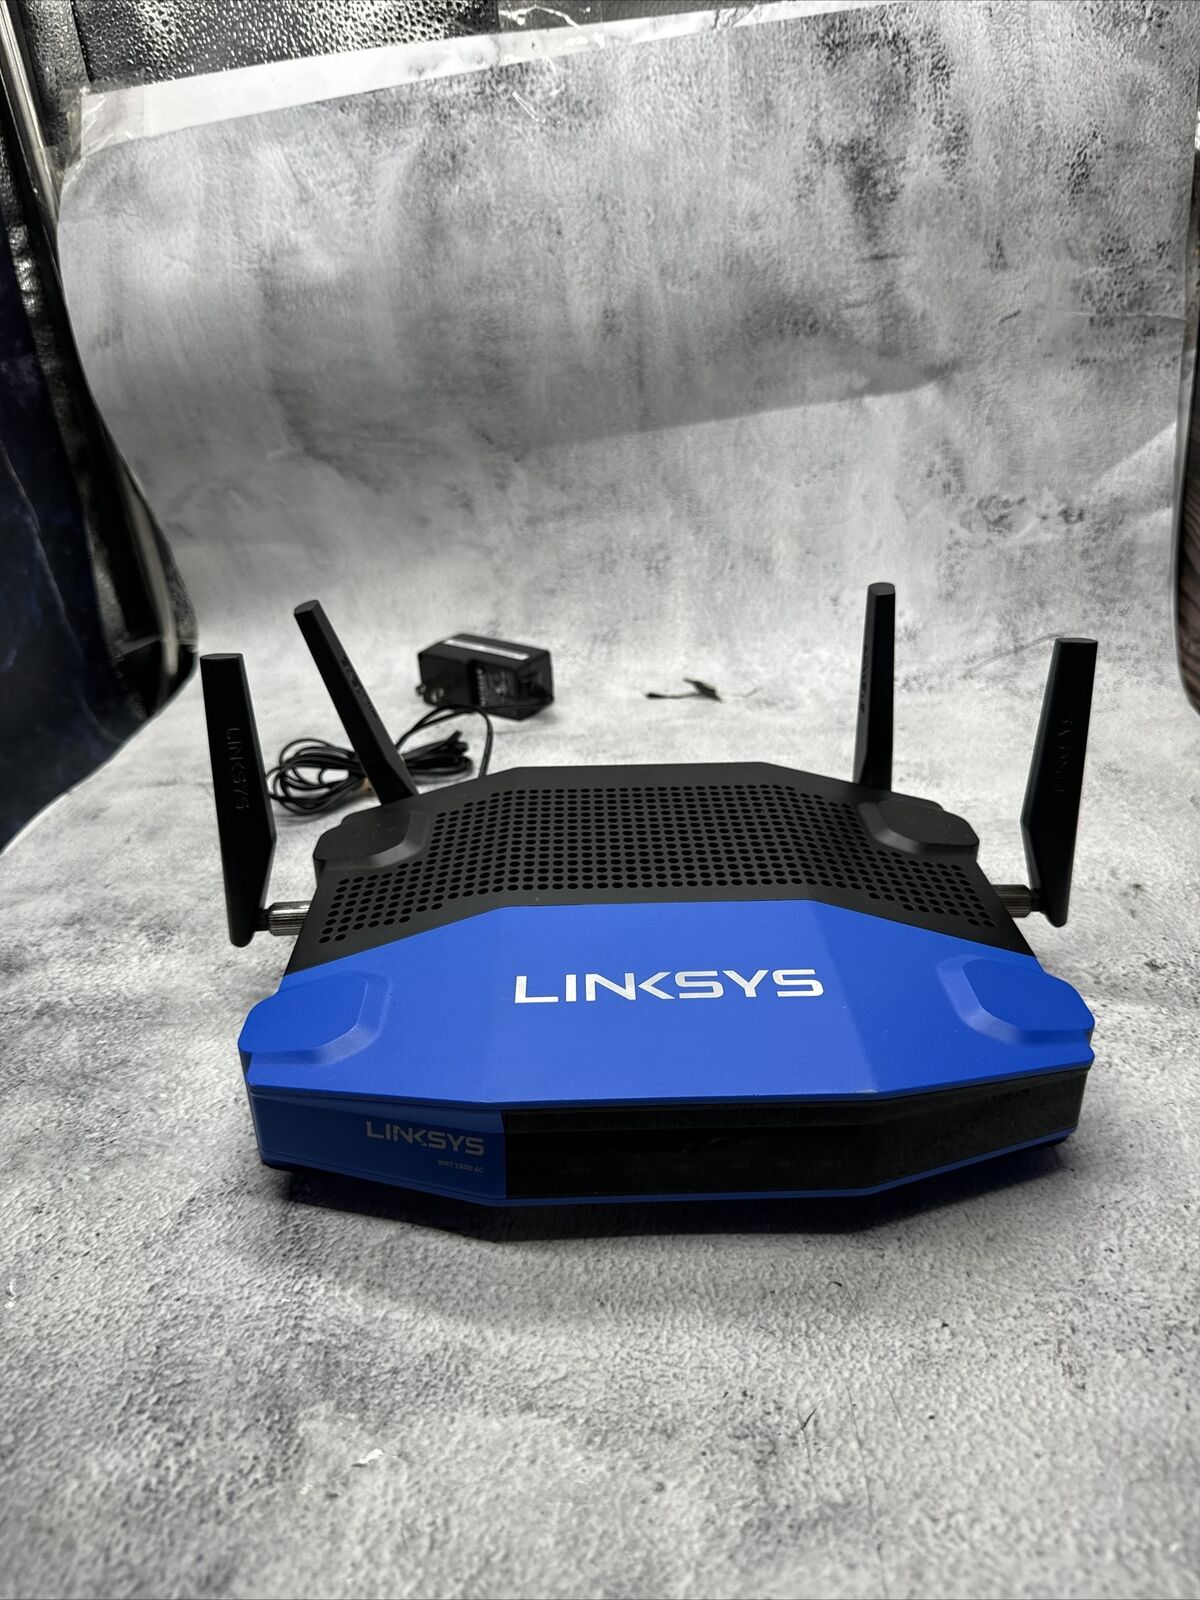 Linksys WRT1900AC 1300 Mbps 4 Port Dual-Band Wi-Fi Router with USB 3.0 port D